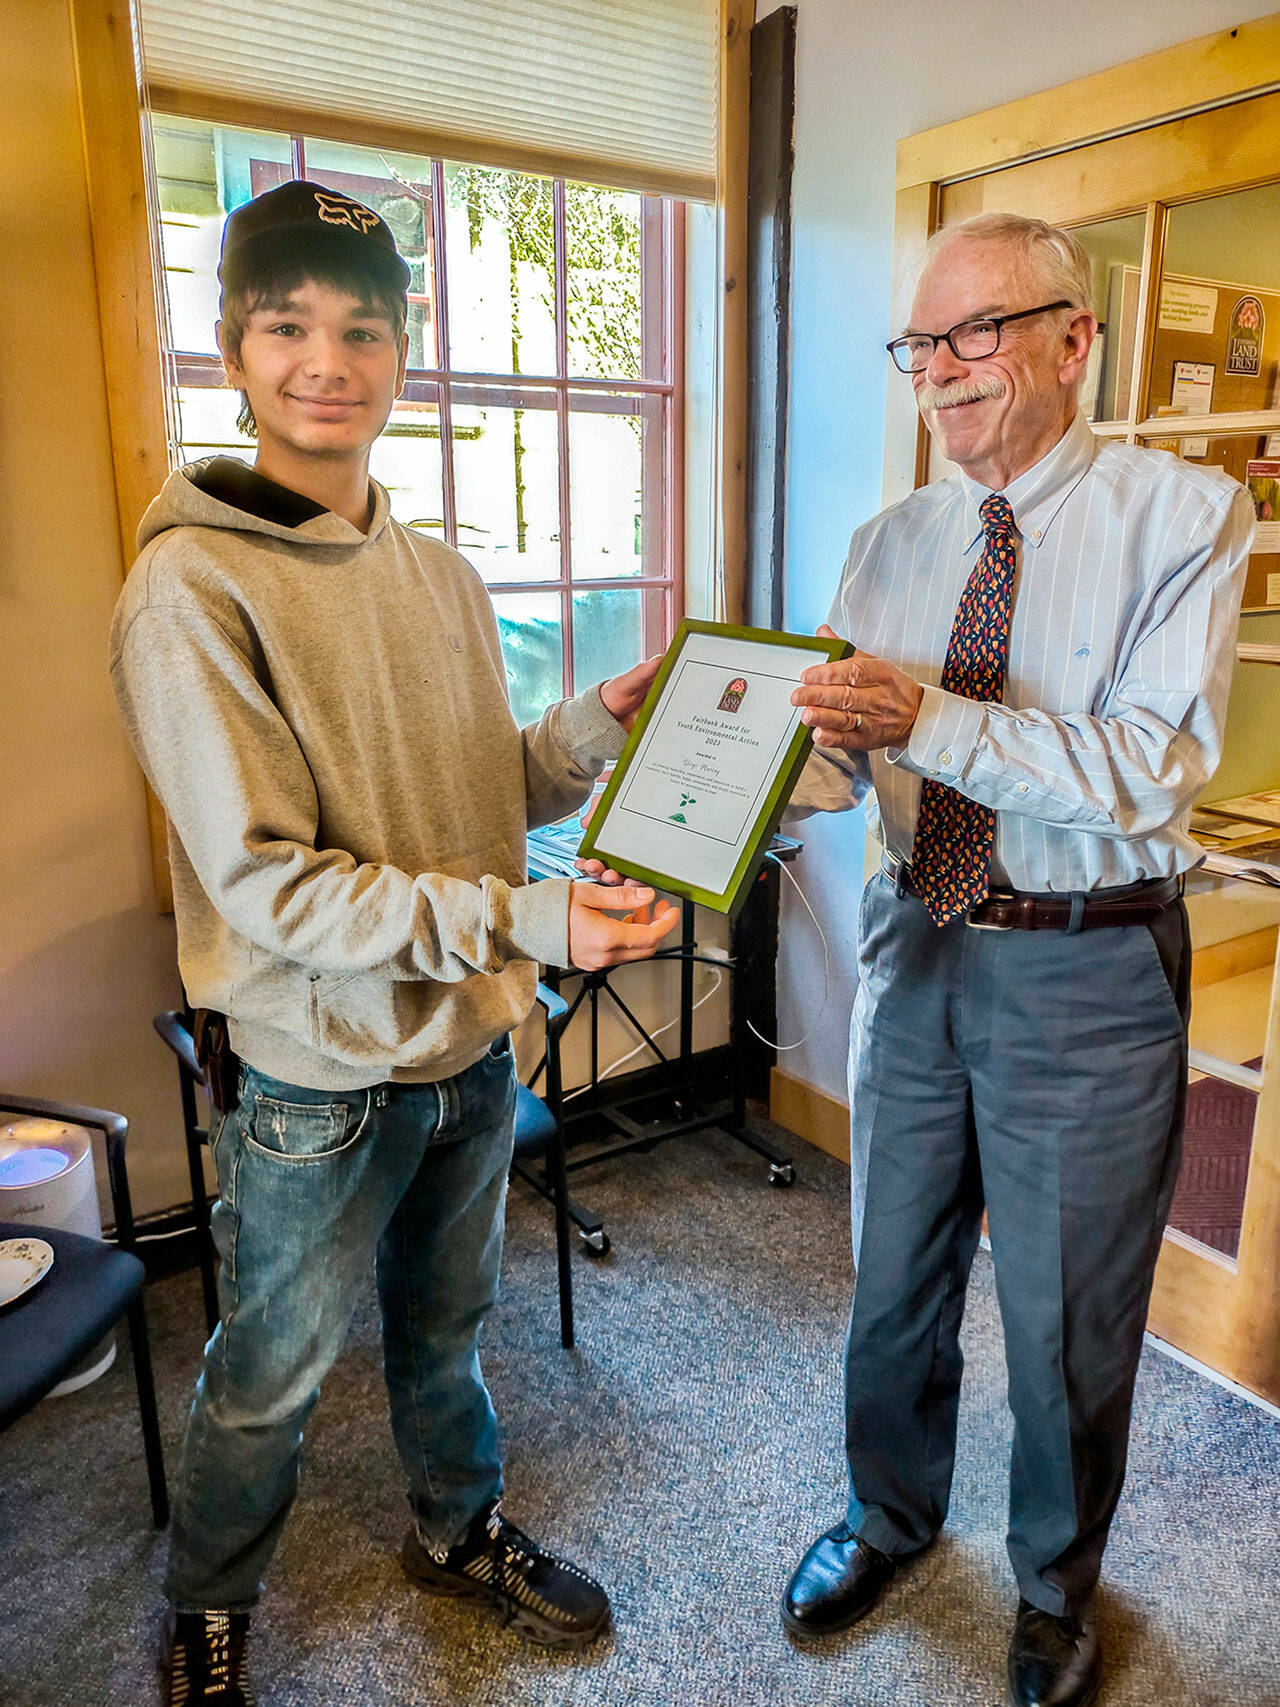 Diego Murray, left, accepts the Fairbank Award for Youth Environmental Action from Richard Tucker, executive director of the Jefferson Land Trust. (photo by Lilly Schneider)